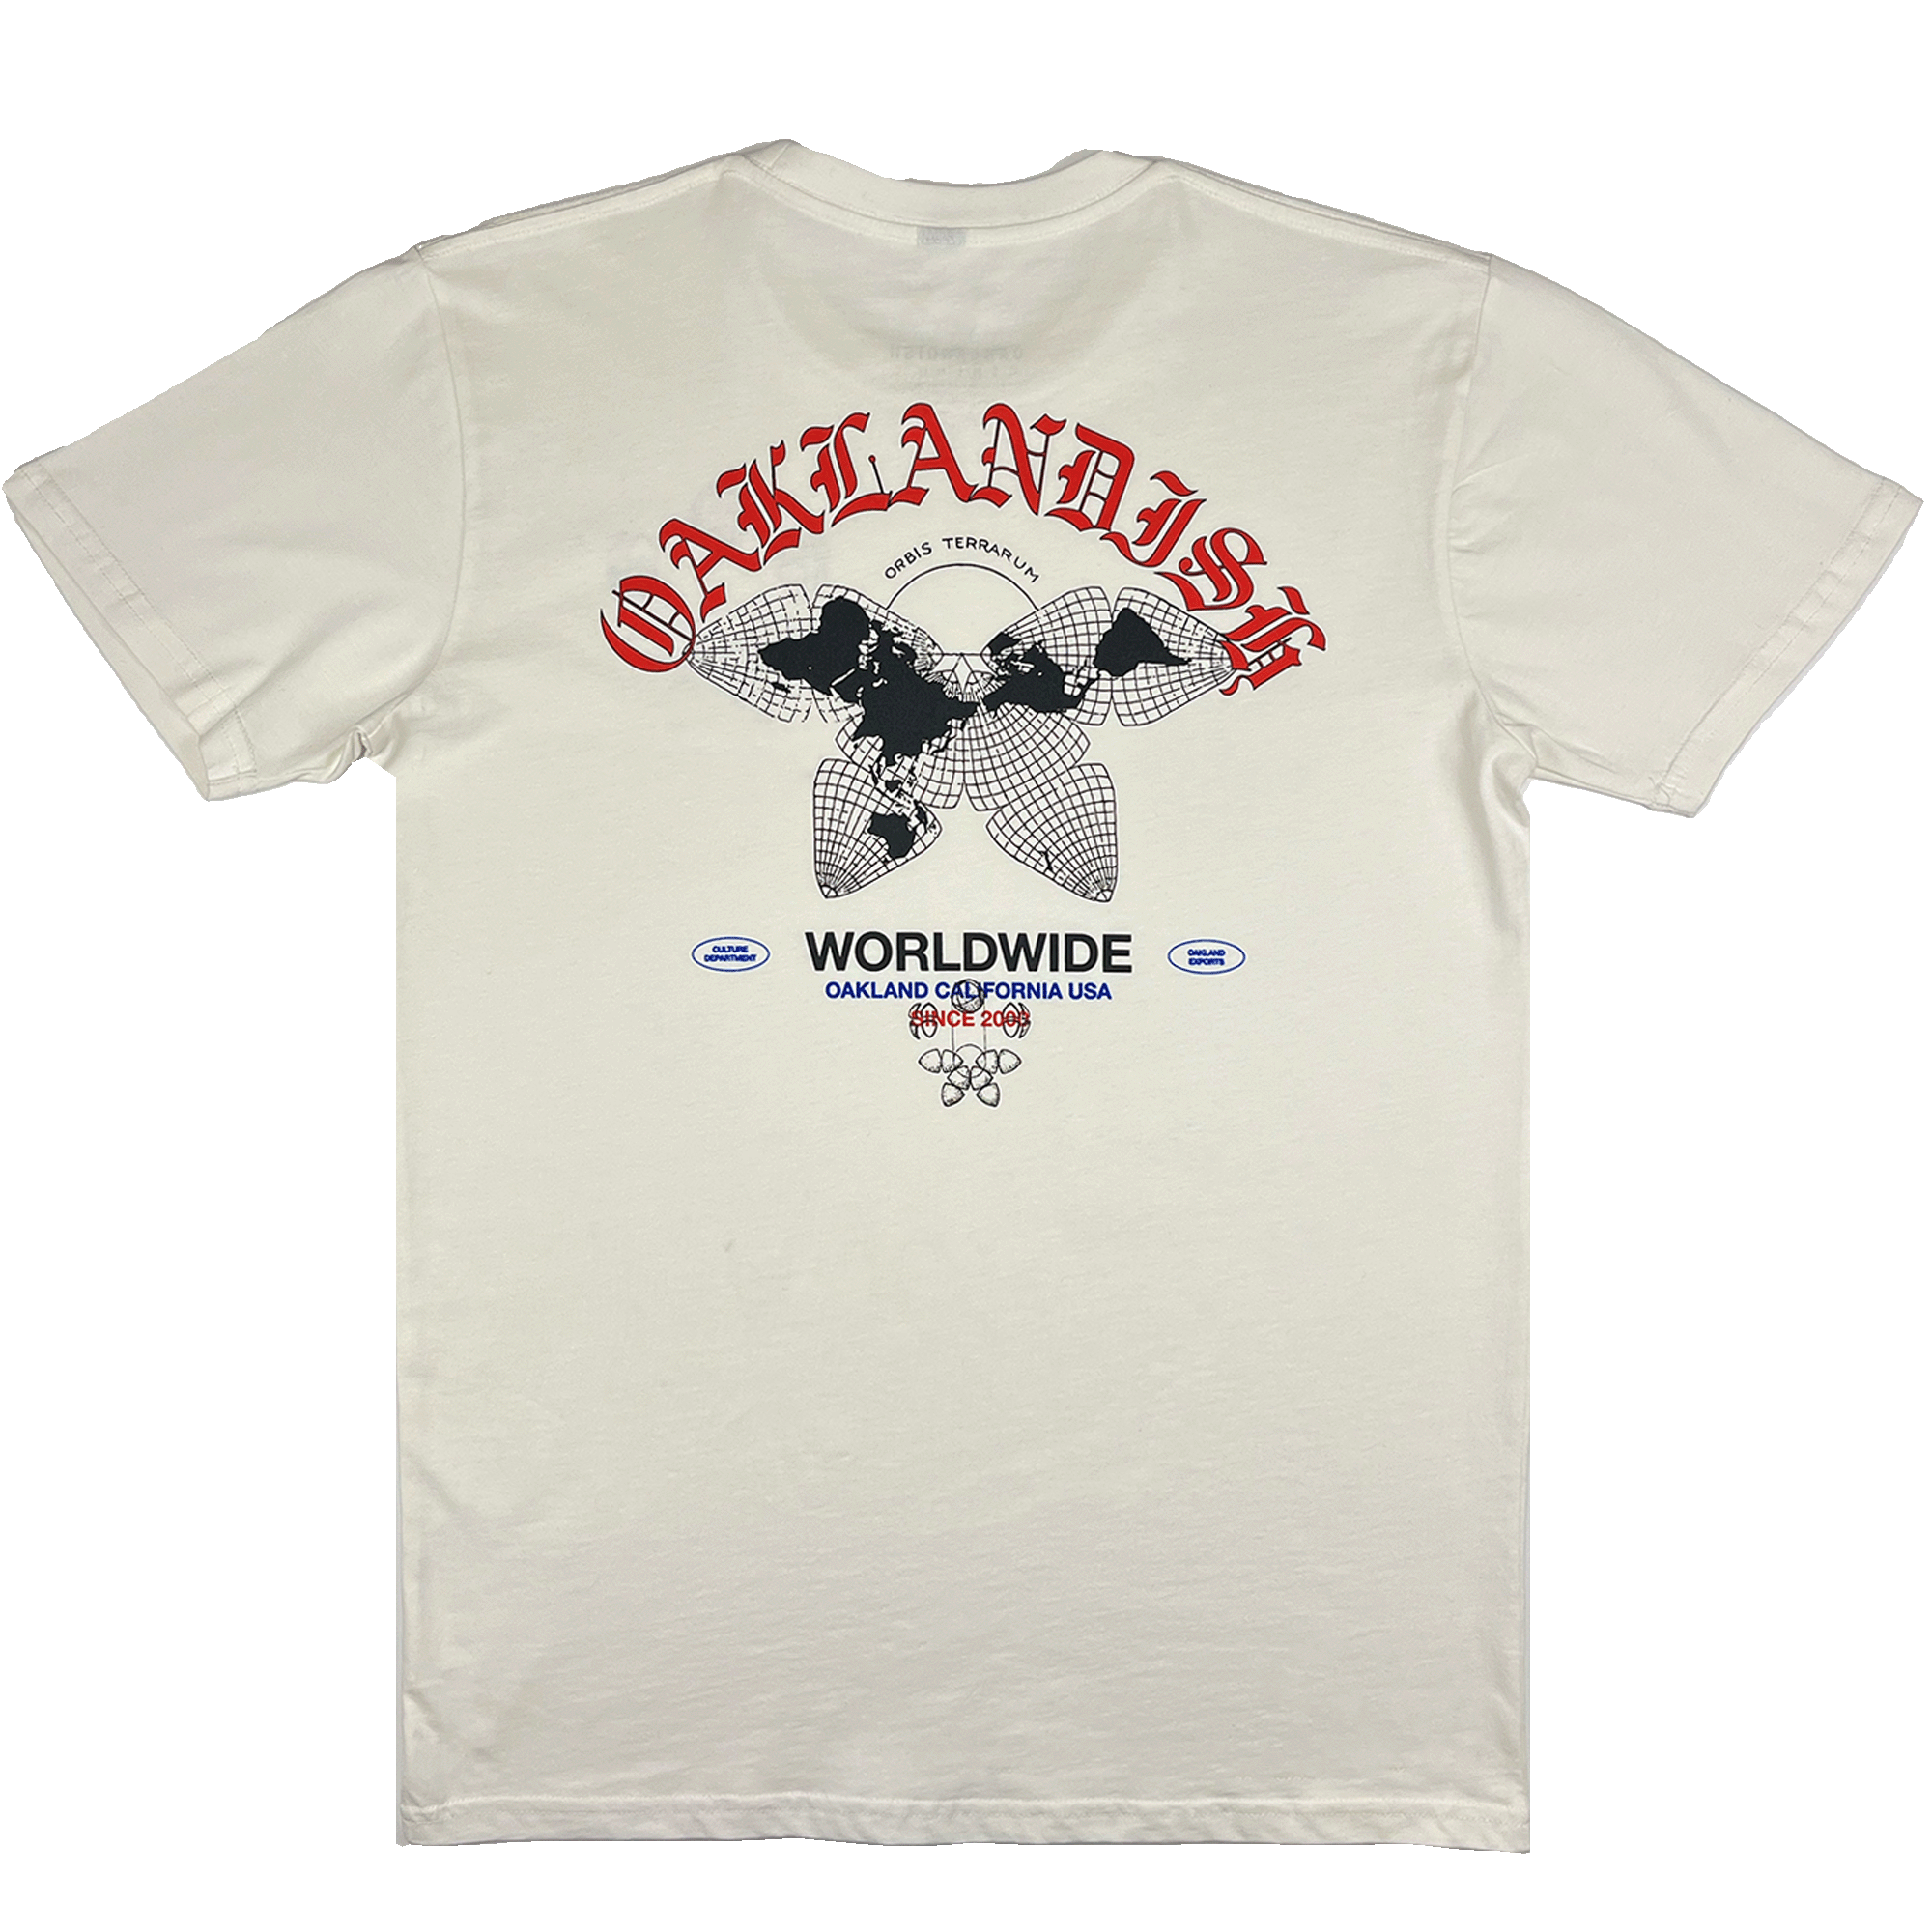 The backside of a natural cotton color t-shirt with a large Oaklandish worldwide graphic.